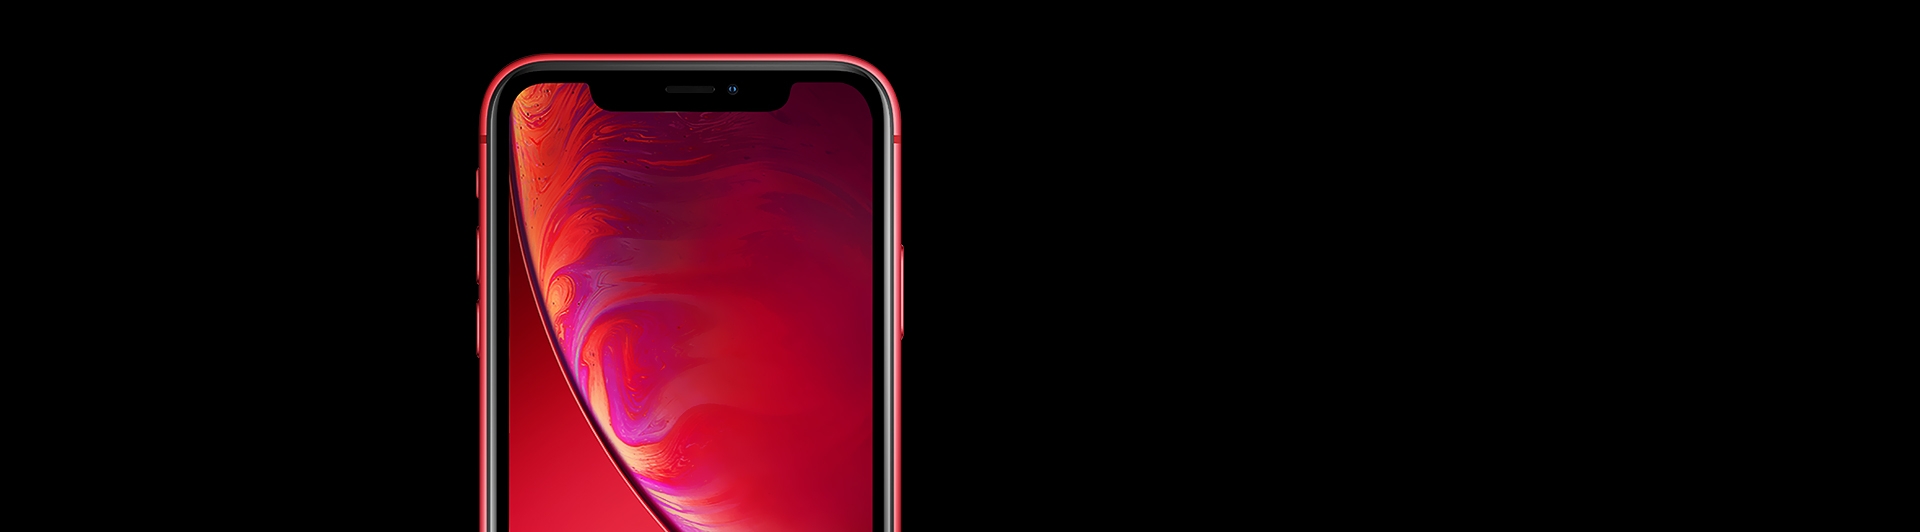 IPHONE XR 256GB RED